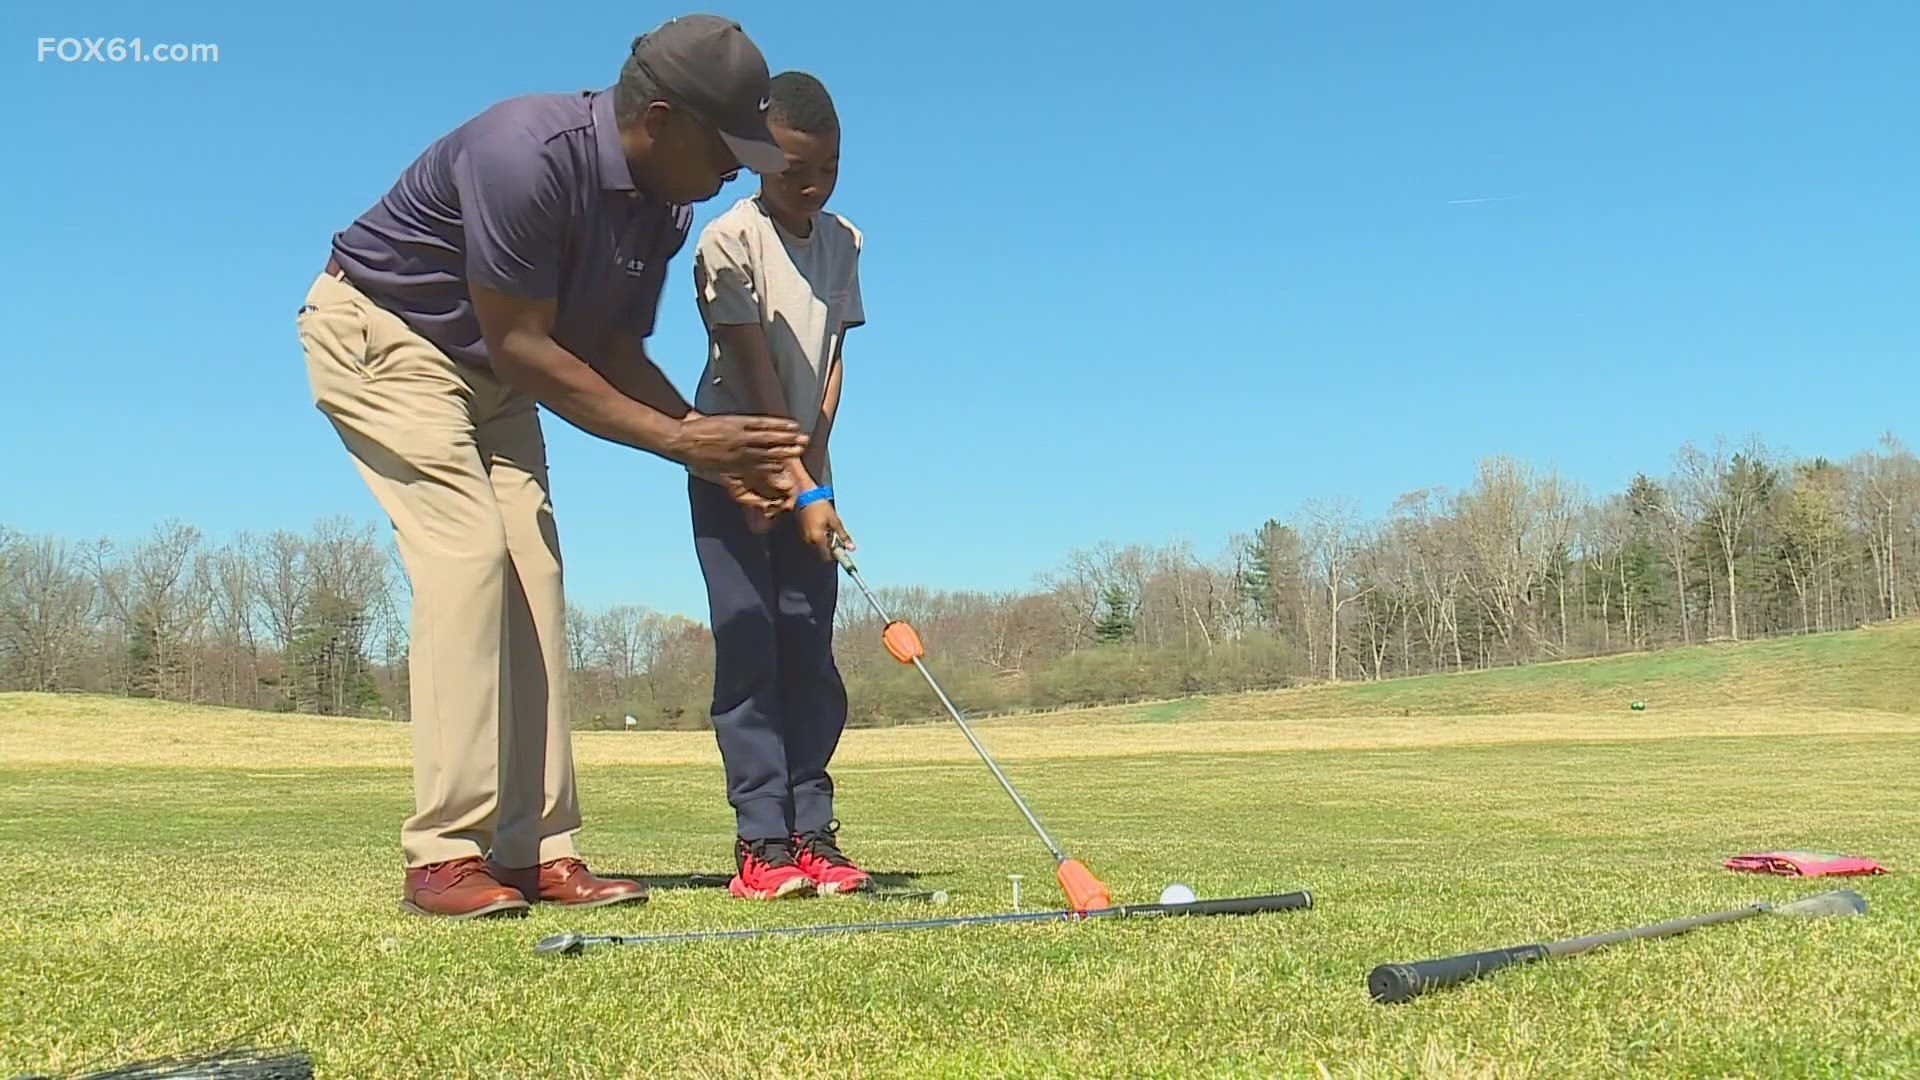 22 Hartford-area students from Camp Courants’ spring break program were at the First Tee developing their skills at golf.